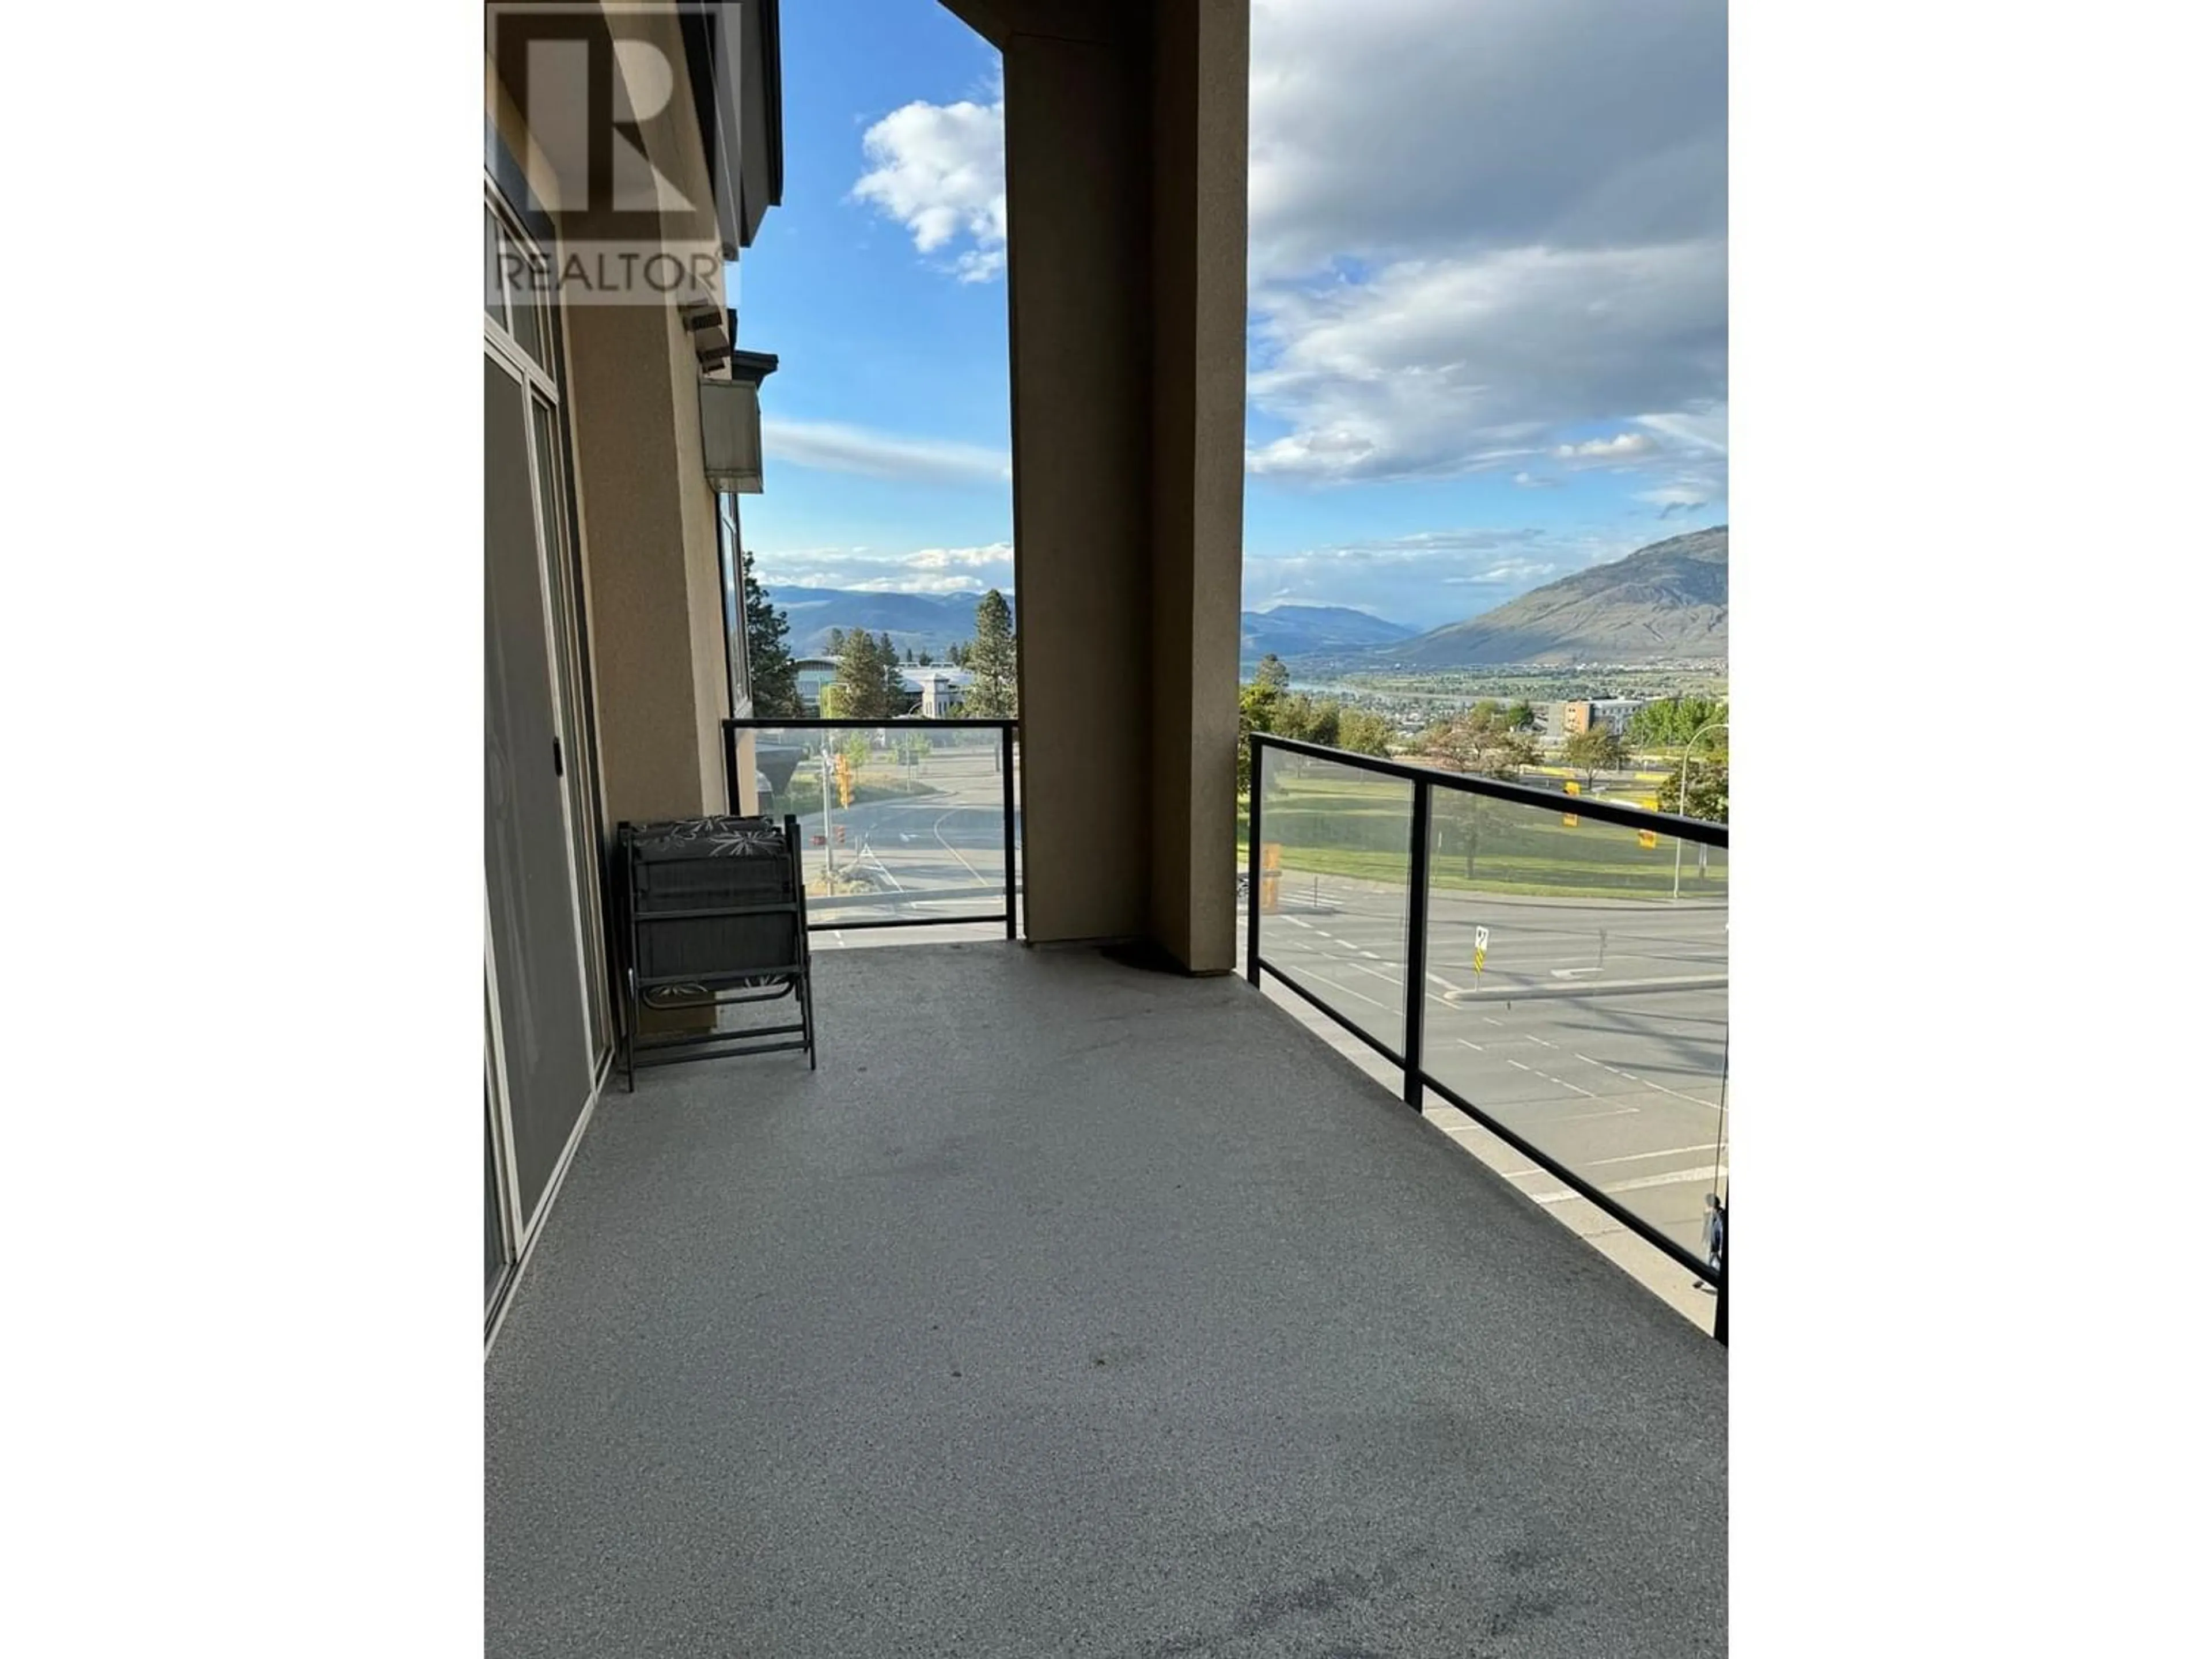 Balcony in the apartment for 410-795 MCGILL RD, Kamloops British Columbia V2C0B9